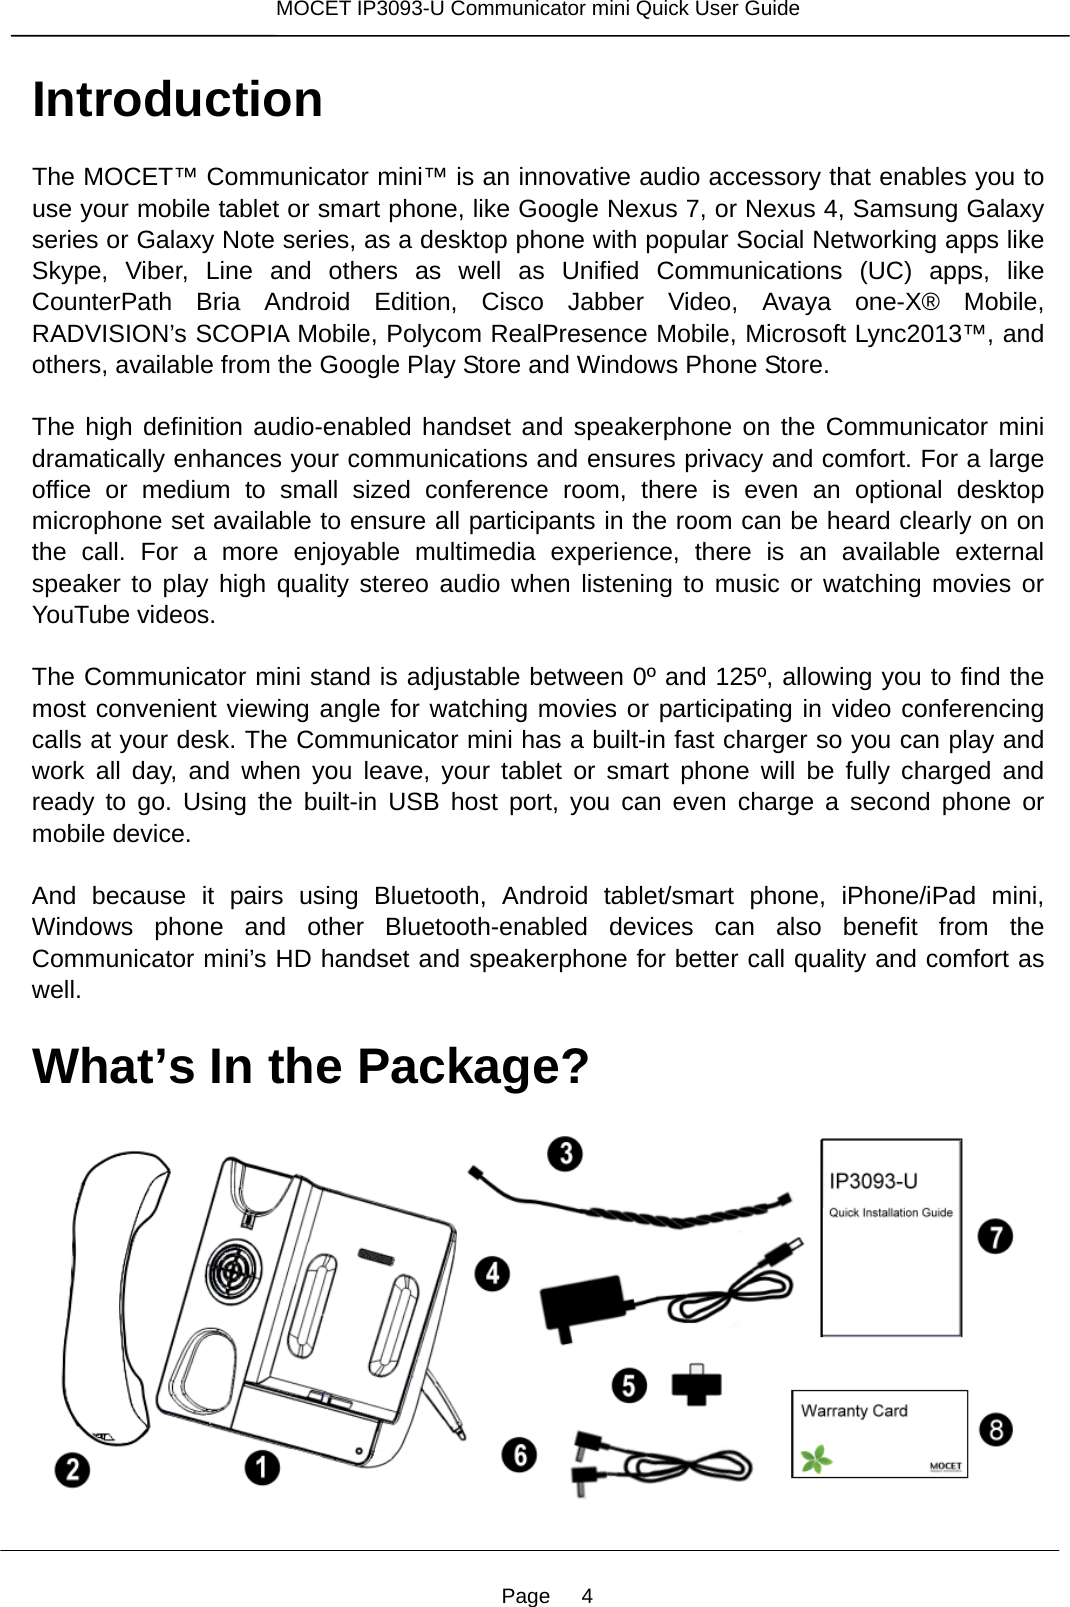 Page   4 MOCET IP3093-U Communicator mini Quick User Guide  Introduction The MOCET™ Communicator mini™ is an innovative audio accessory that enables you to use your mobile tablet or smart phone, like Google Nexus 7, or Nexus 4, Samsung Galaxy series or Galaxy Note series, as a desktop phone with popular Social Networking apps like Skype, Viber, Line and others as well as Unified Communications (UC) apps, like CounterPath Bria Android Edition, Cisco Jabber Video, Avaya one-X® Mobile, RADVISION’s SCOPIA Mobile, Polycom RealPresence Mobile, Microsoft Lync2013™, and others, available from the Google Play Store and Windows Phone Store.  The high definition audio-enabled handset and speakerphone on the Communicator mini dramatically enhances your communications and ensures privacy and comfort. For a large office or medium to small sized conference room, there is even an optional desktop microphone set available to ensure all participants in the room can be heard clearly on on the call. For a more enjoyable multimedia experience, there is an available external speaker to play high quality stereo audio when listening to music or watching movies or YouTube videos.  The Communicator mini stand is adjustable between 0º and 125º, allowing you to find the most convenient viewing angle for watching movies or participating in video conferencing calls at your desk. The Communicator mini has a built-in fast charger so you can play and work all day, and when you leave, your tablet or smart phone will be fully charged and ready to go. Using the built-in USB host port, you can even charge a second phone or mobile device.  And because it pairs using Bluetooth, Android tablet/smart phone, iPhone/iPad mini, Windows phone and other Bluetooth-enabled devices can also benefit from the Communicator mini’s HD handset and speakerphone for better call quality and comfort as well.  What’s In the Package?      